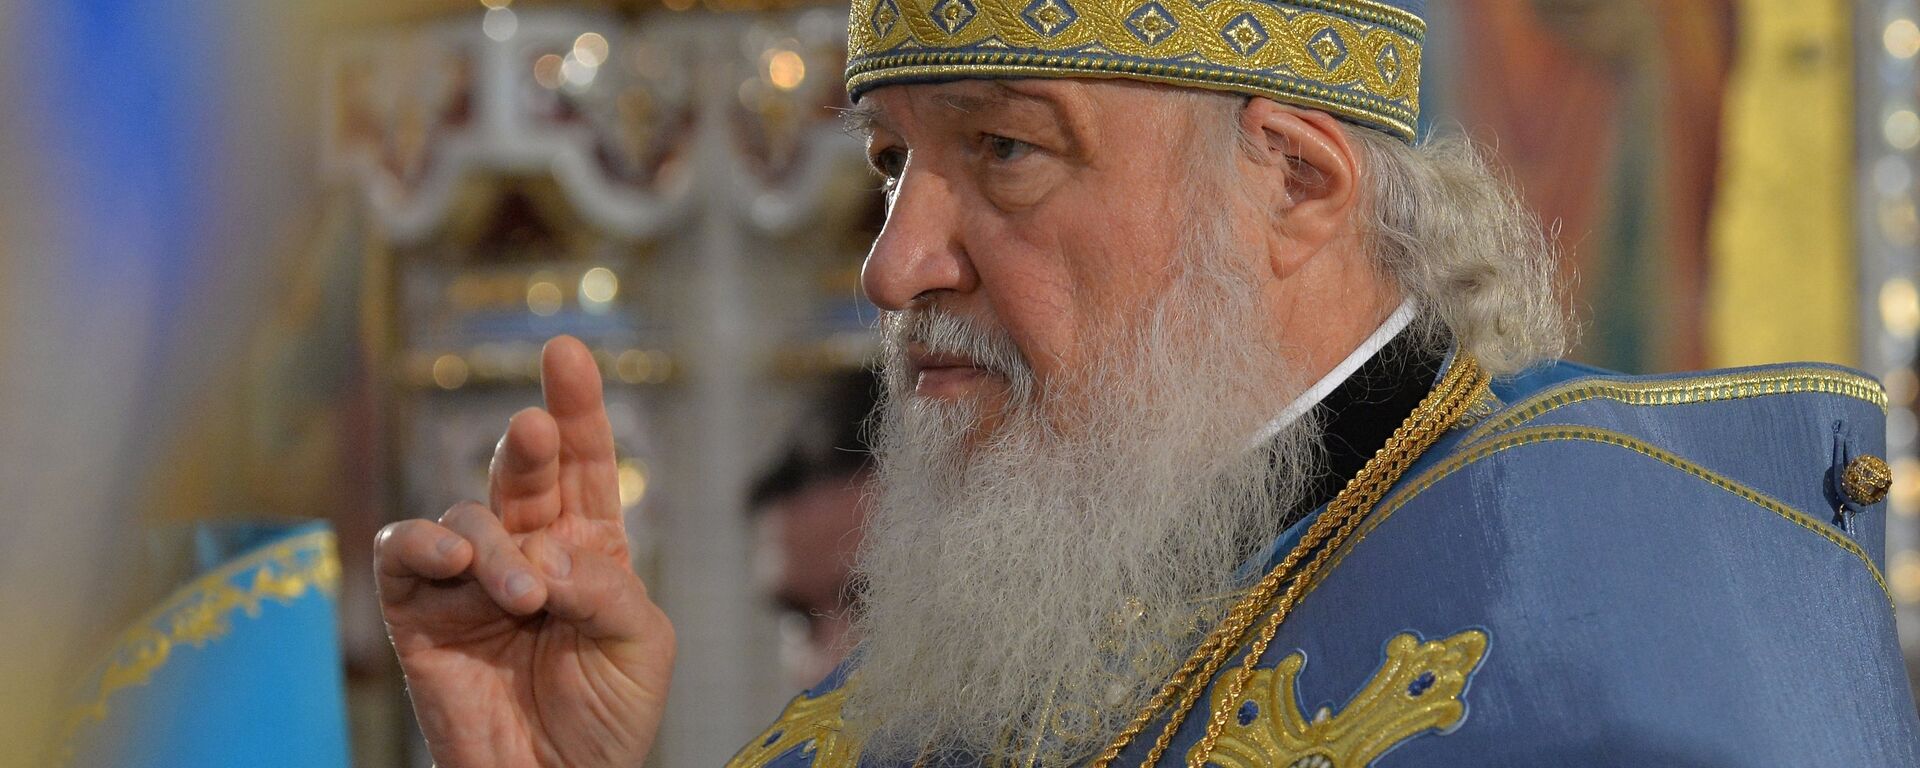 Russian Orthodox Patriarch Kirill conducts a consecrating ceremony at the All Saints' Church, in Minsk, Belarus, October 14, 2018 - Sputnik International, 1920, 07.01.2019